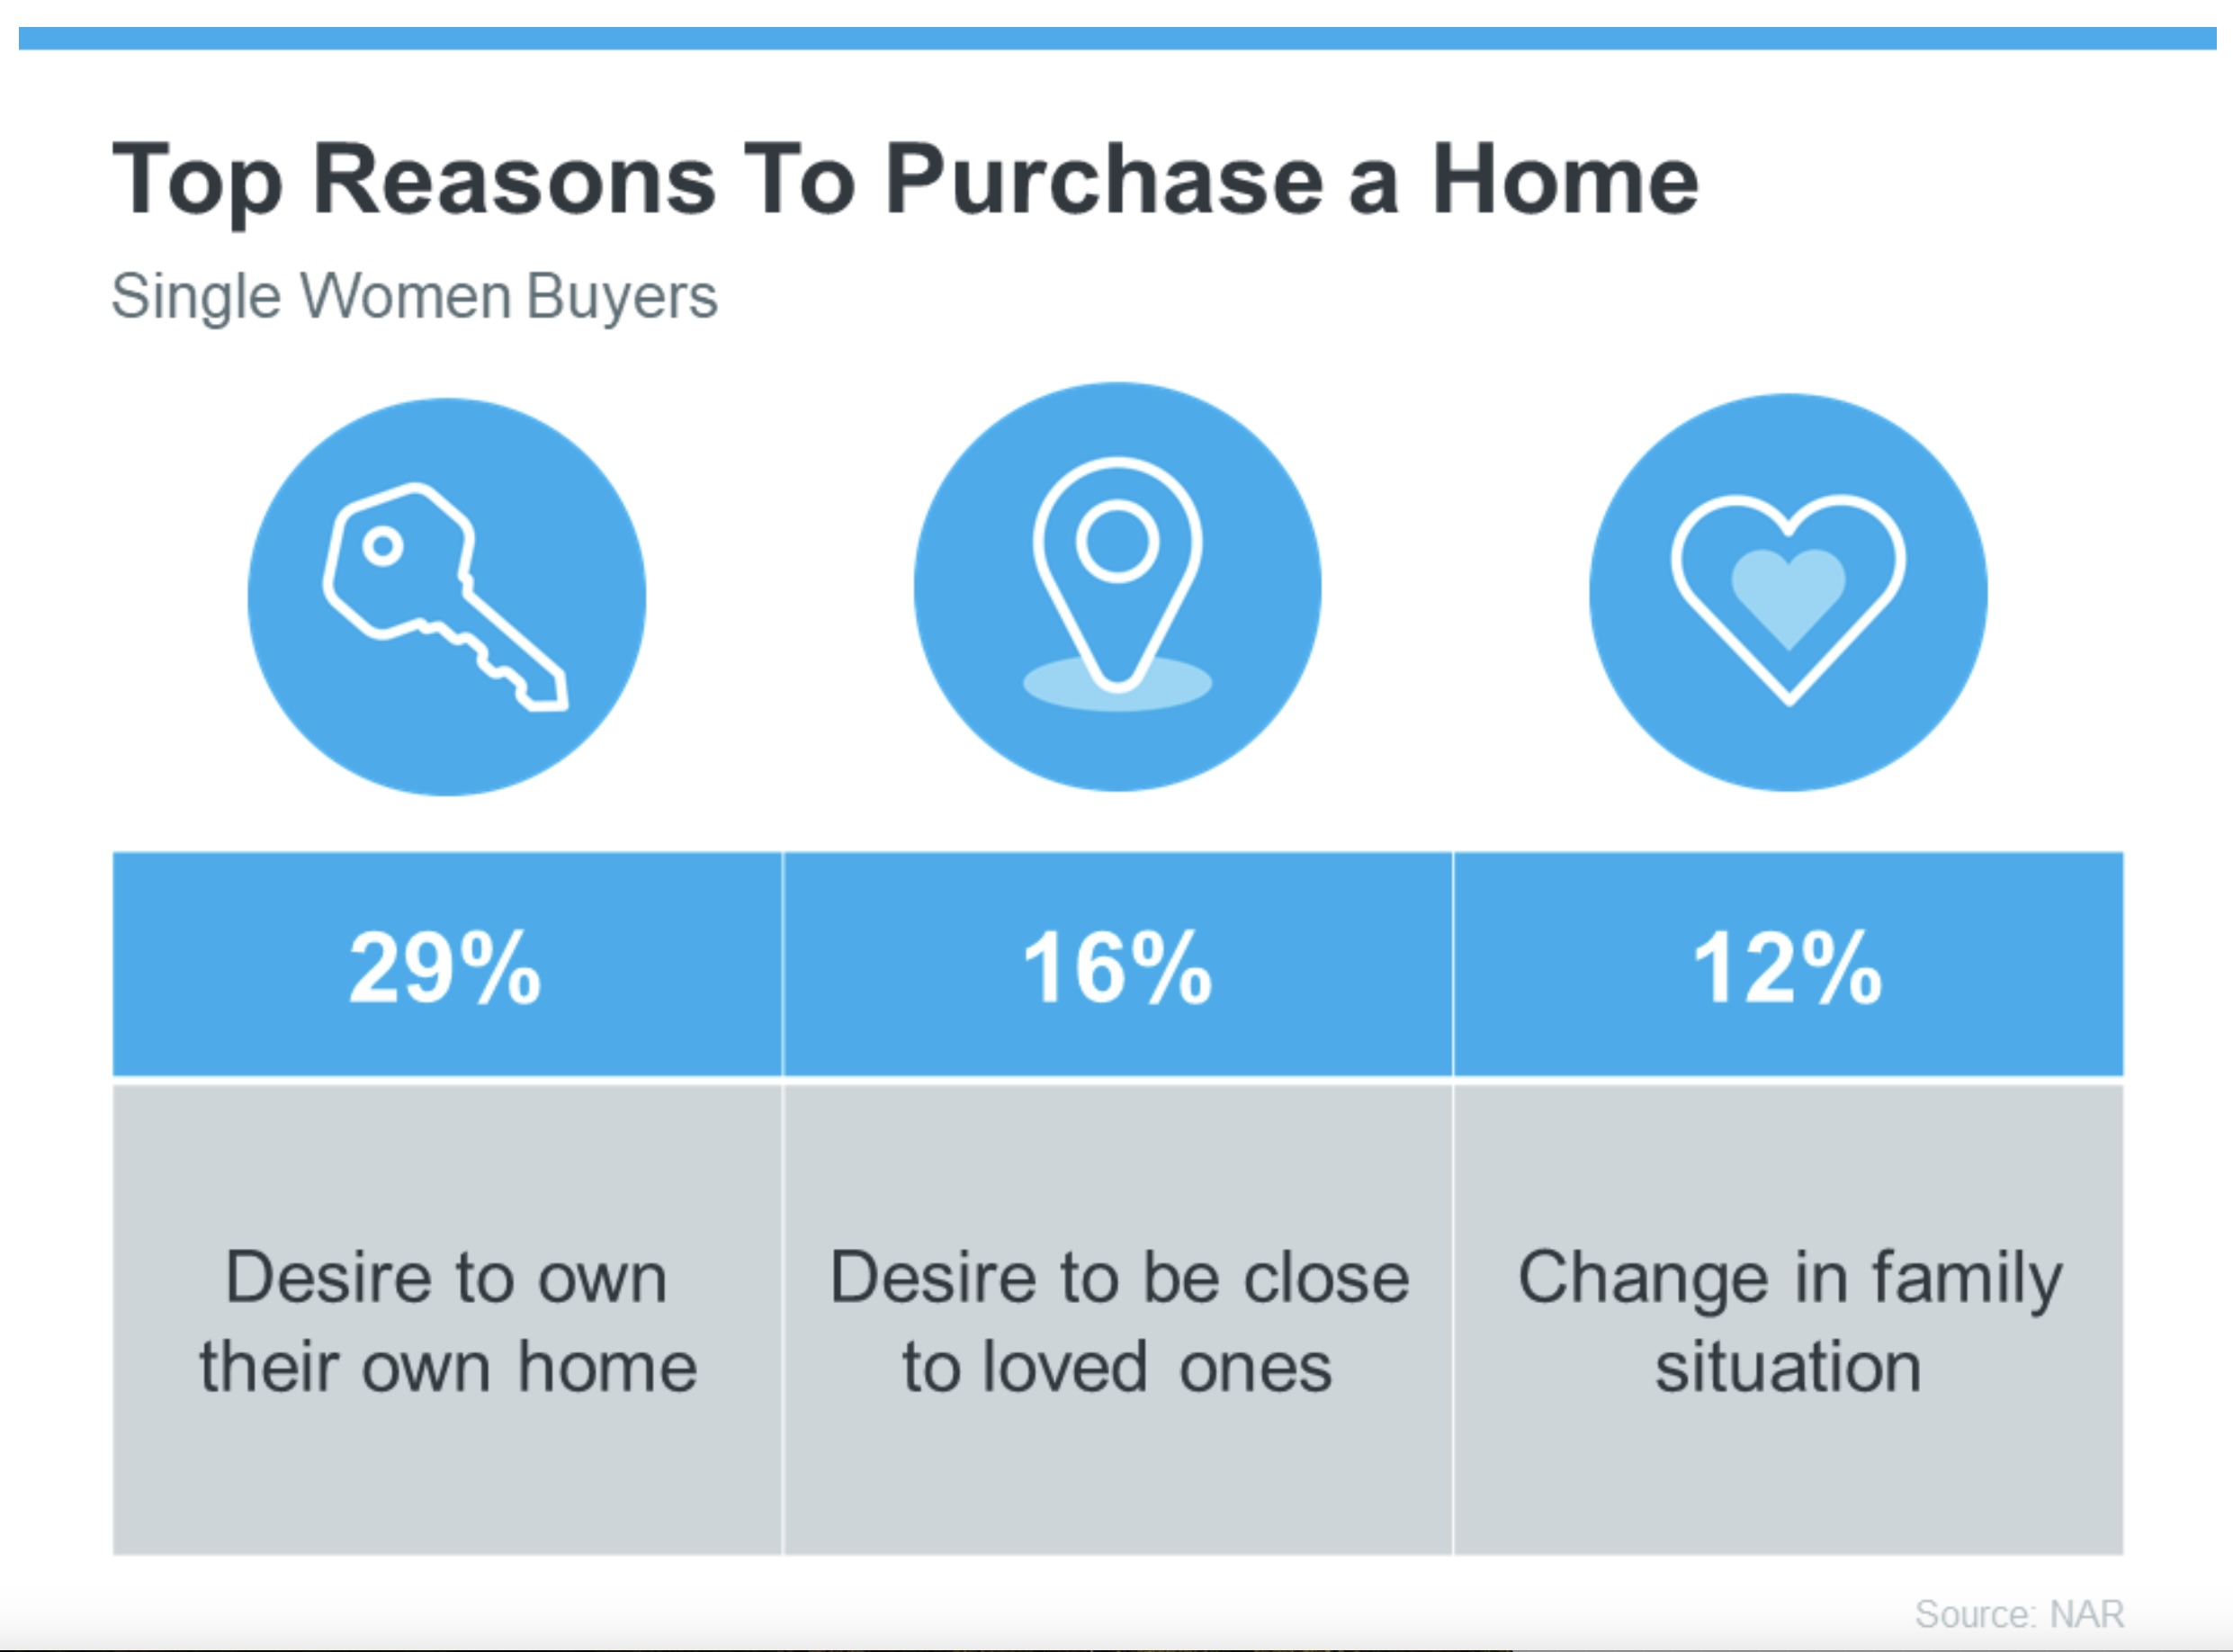 Top Reasons to Purchase a Home